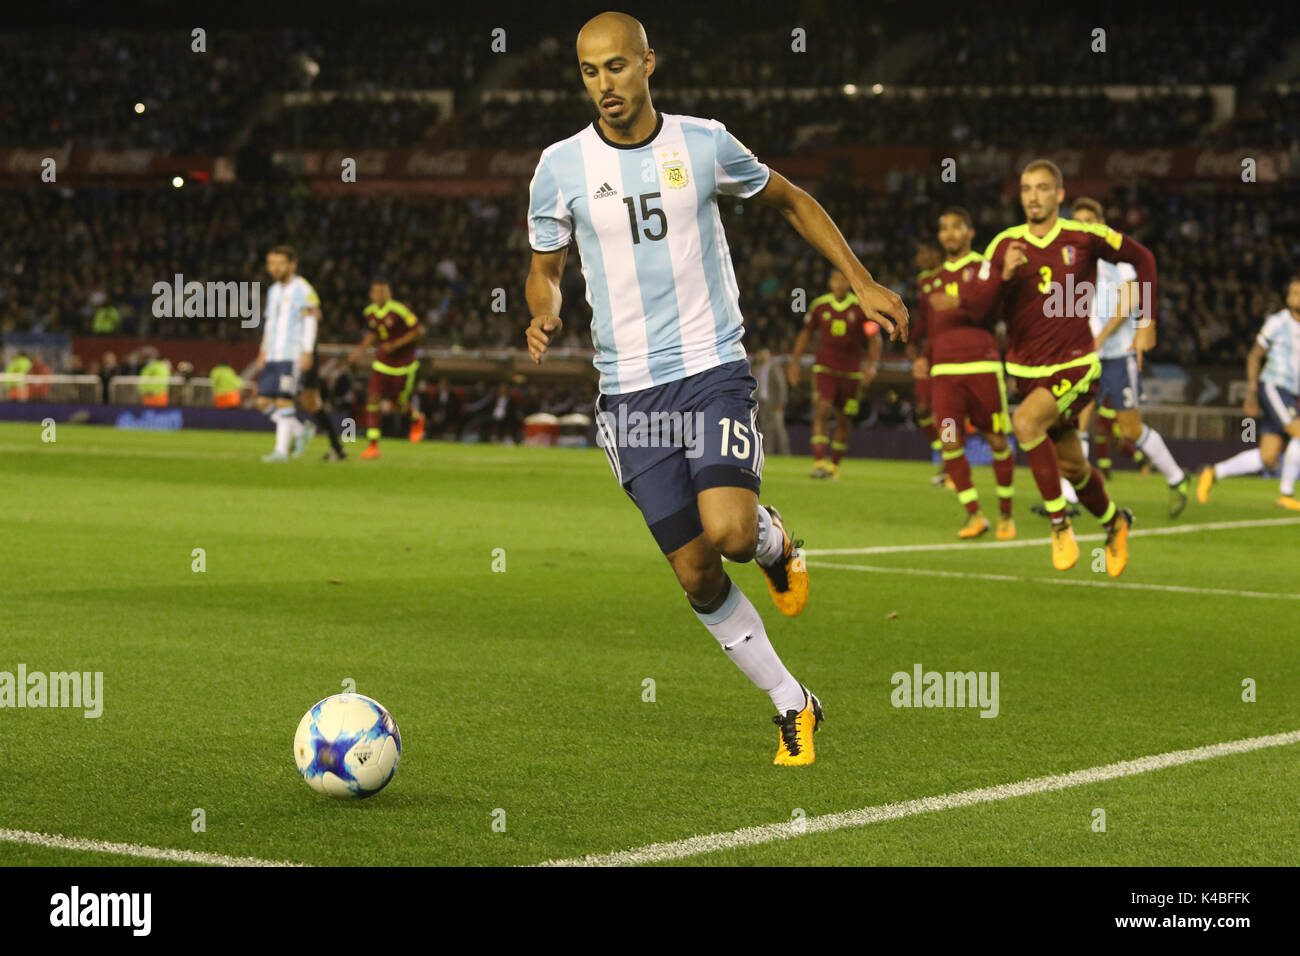 Buenos Aires, Argentina. 5th Sep, 2017.  Guido Pizarro of Argentina during the match with Venezuela for 2018 Fifa World Cup for Conmebol at Monumental Stadium, Buenos Aires, Argentina. Credit: Néstor J. Beremblum/Alamy Live News Stock Photo